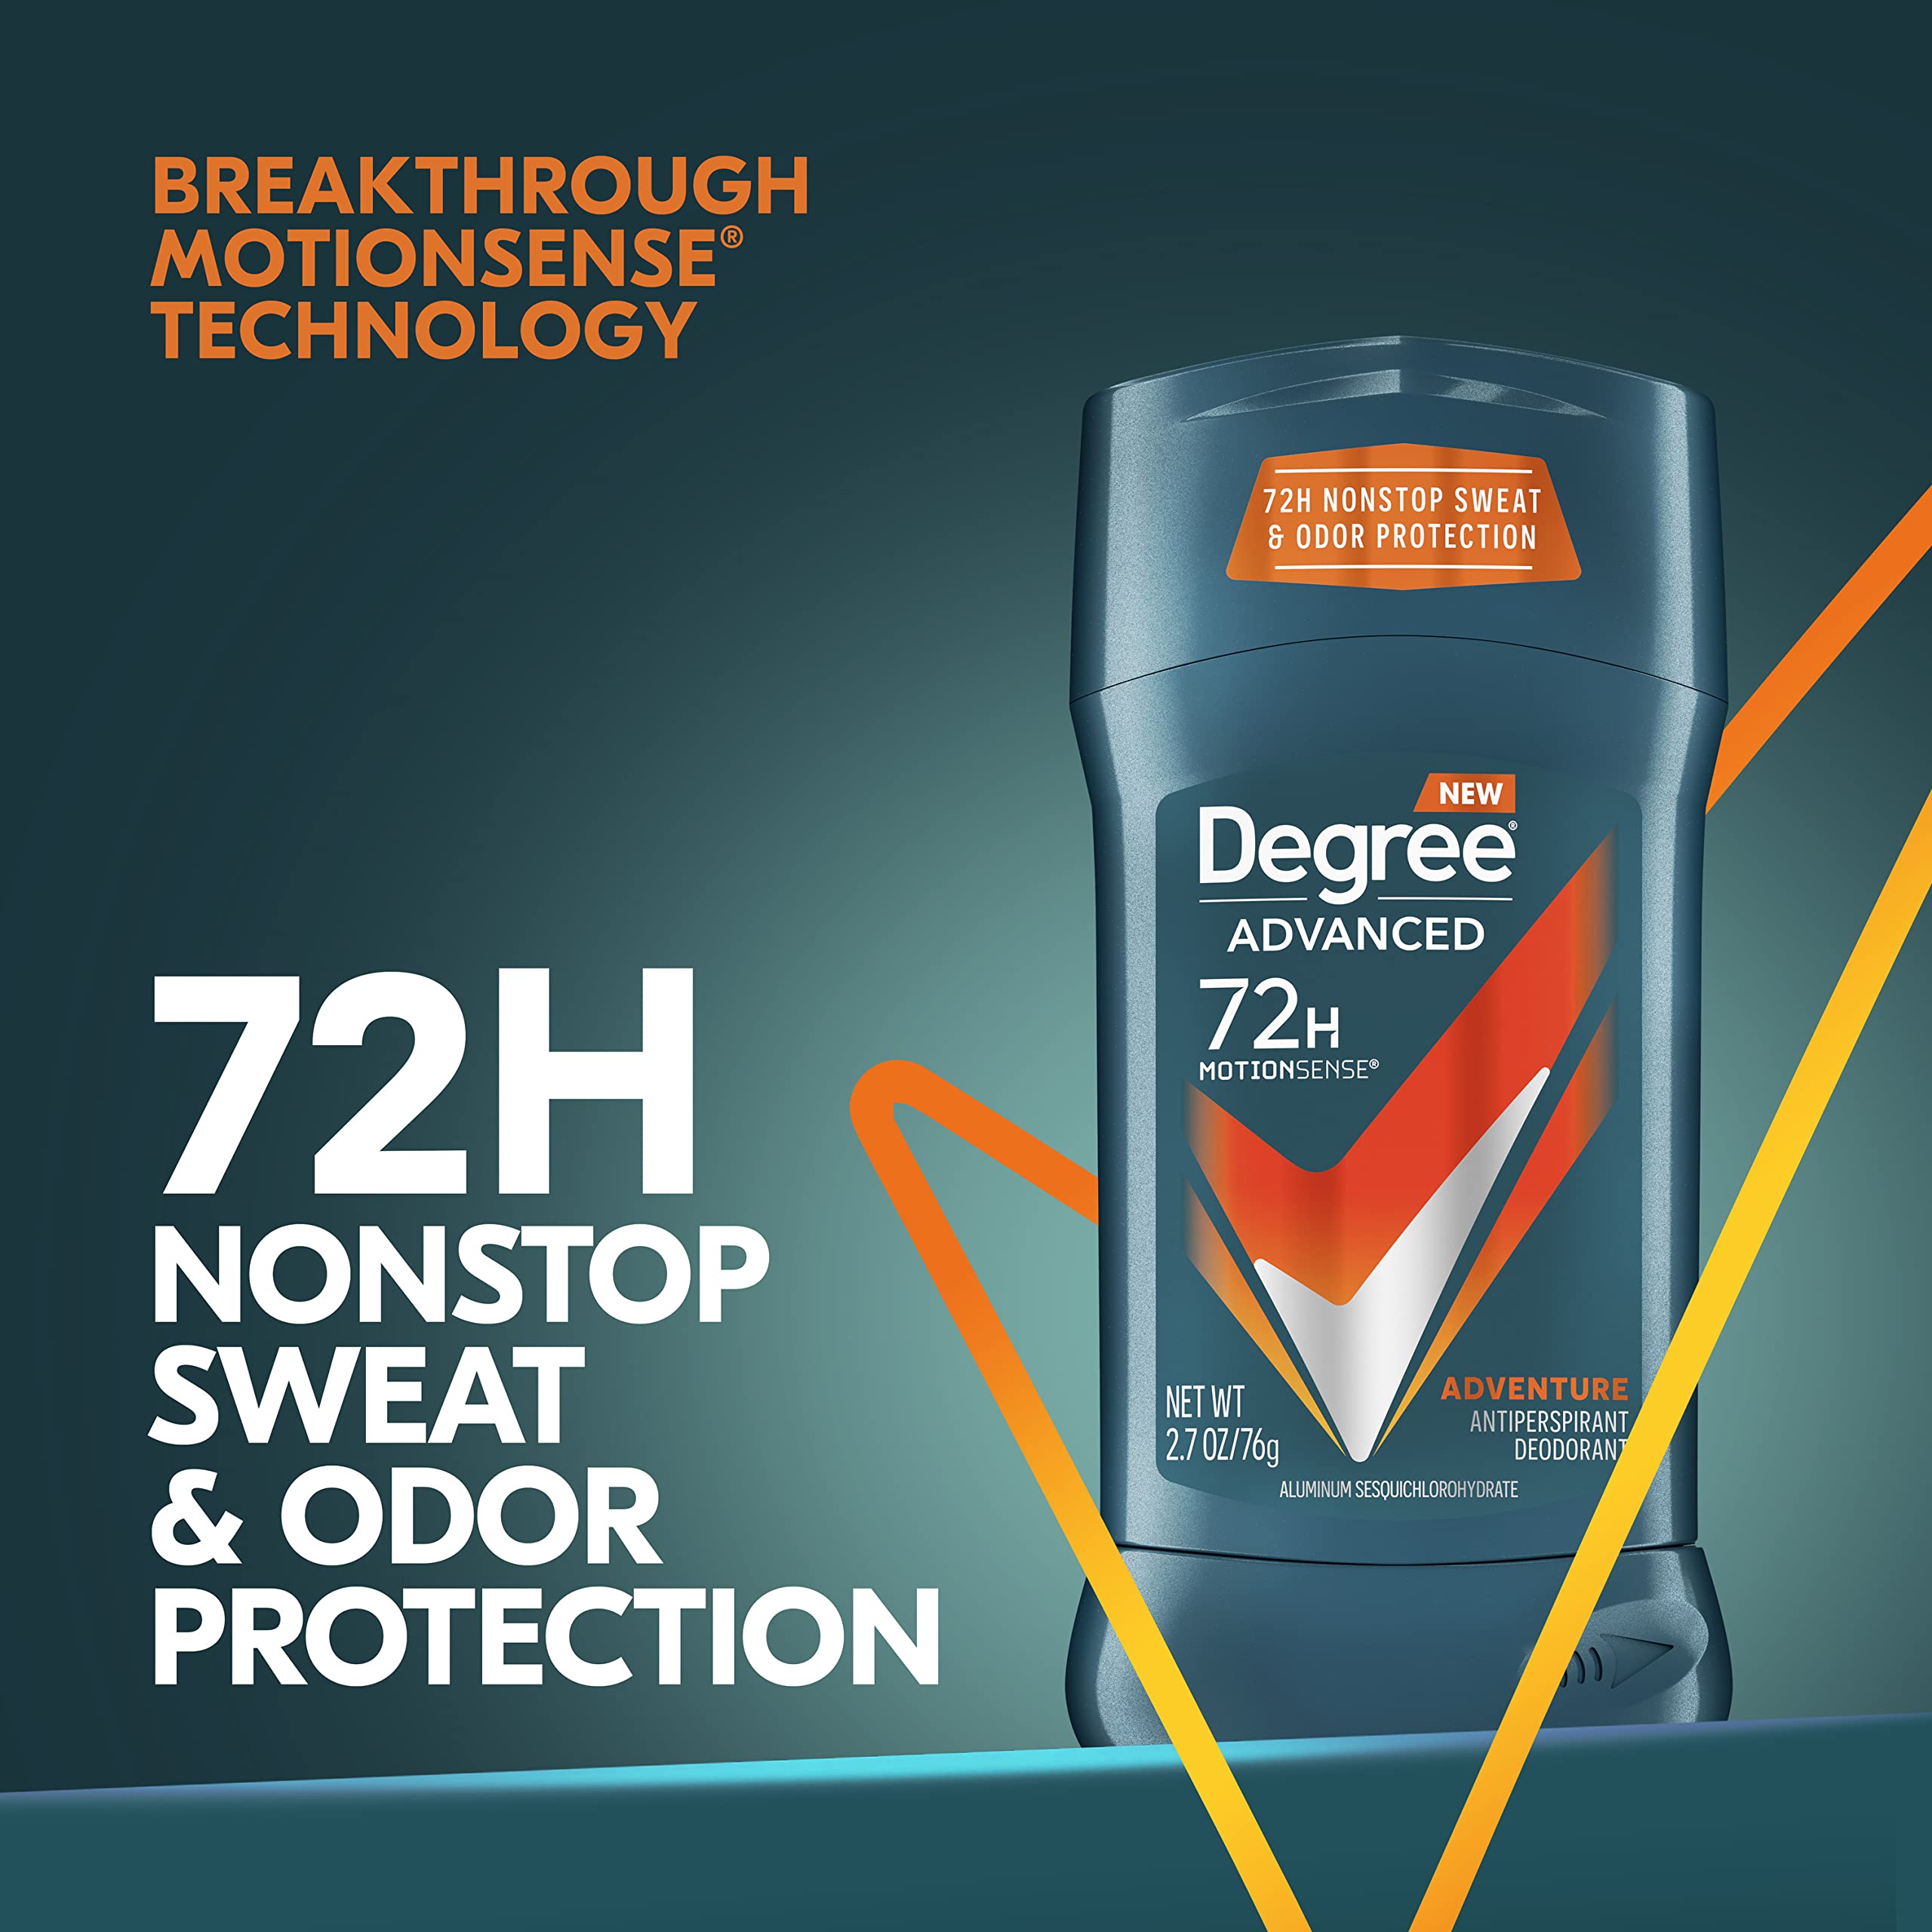 Degree Men Advanced Antiperspirant Deodorant Adventure 72-Hour Sweat and Odor Protection Antiperspirant For Men With MotionSense Technology 2.7 oz ( Pack of 4 )